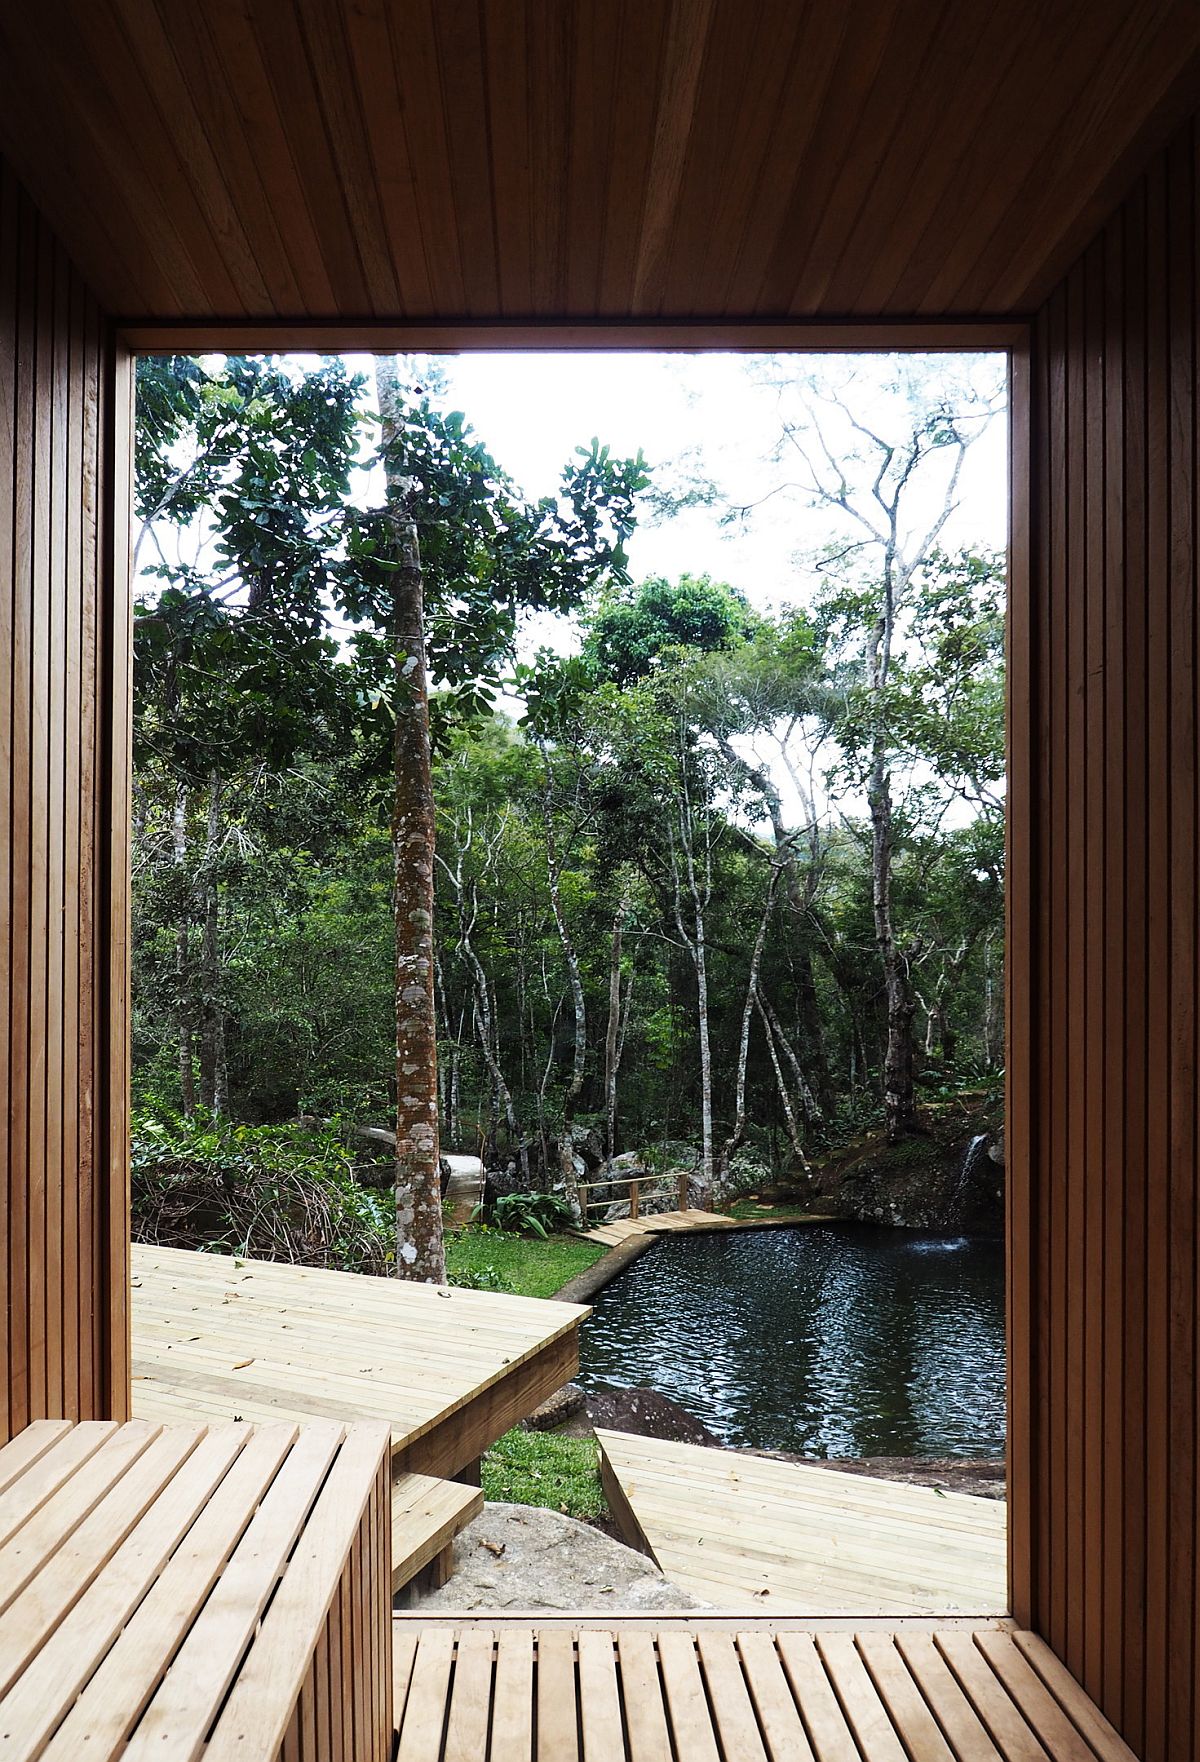 Sauna at the pavilion overlooking the natural pool